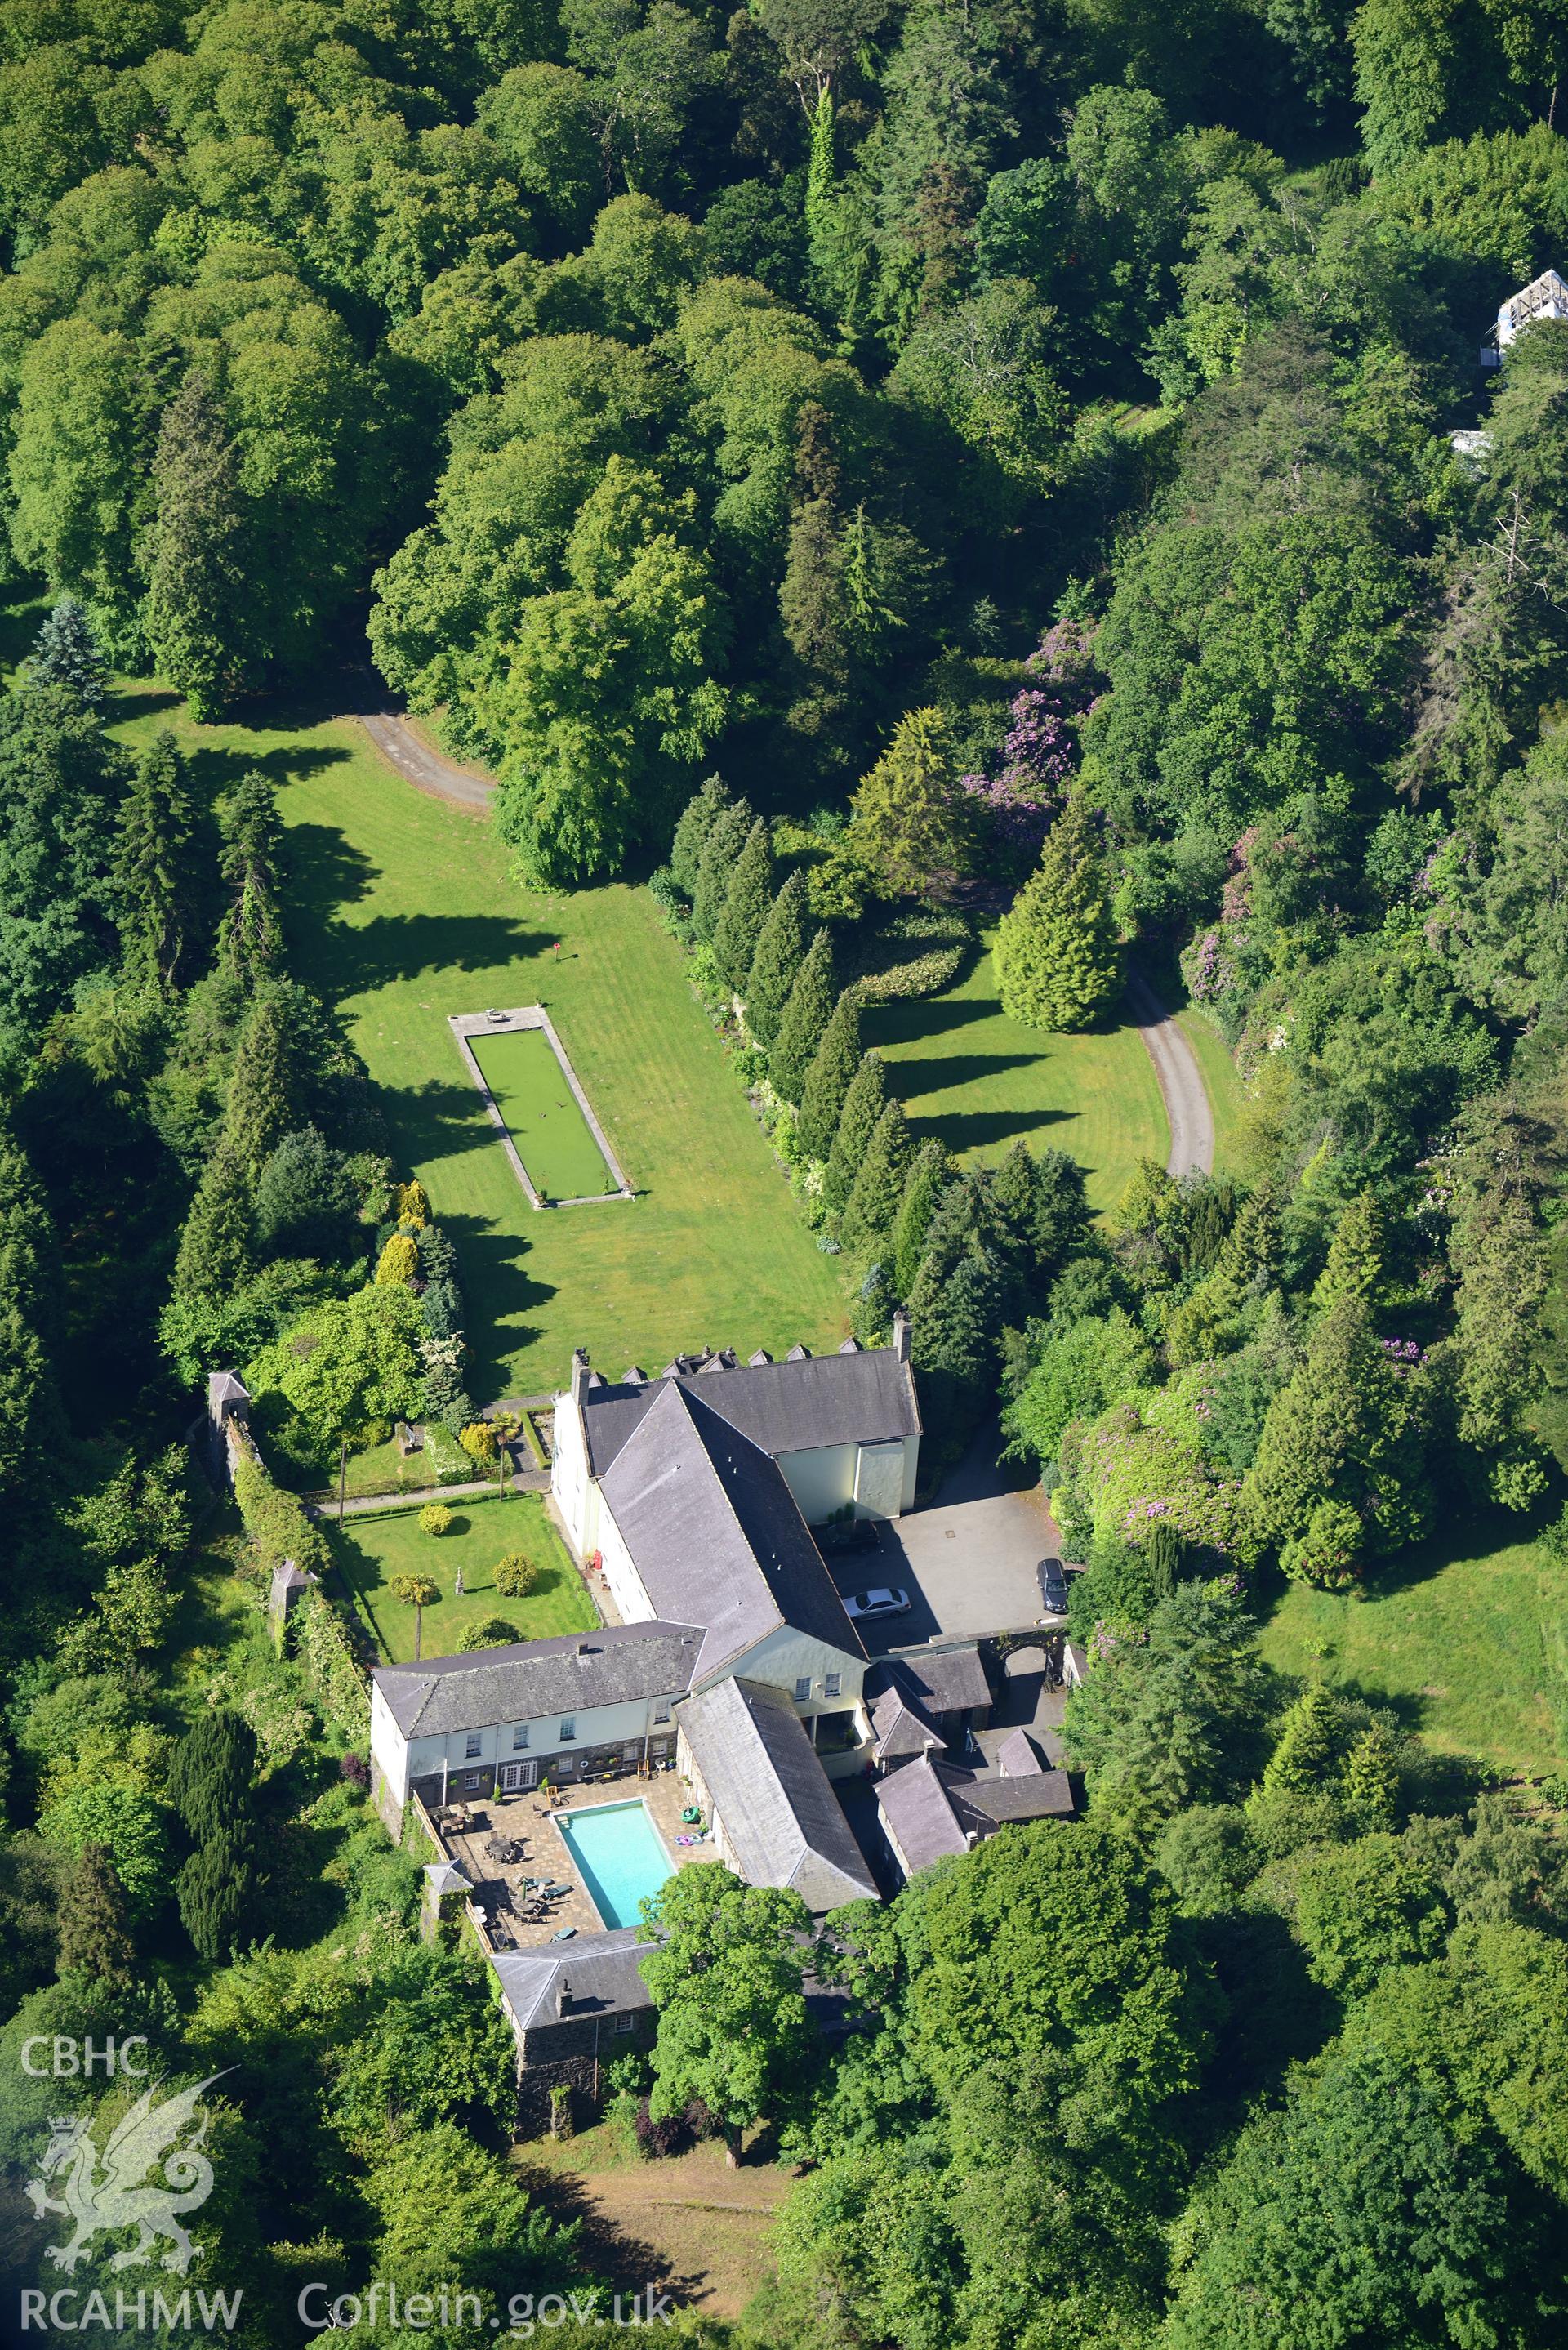 Plas Boduan surrounded by its park and gardens. Oblique aerial photograph taken during the Royal Commission's programme of archaeological aerial reconnaissance by Toby Driver on 23rd June 2015.